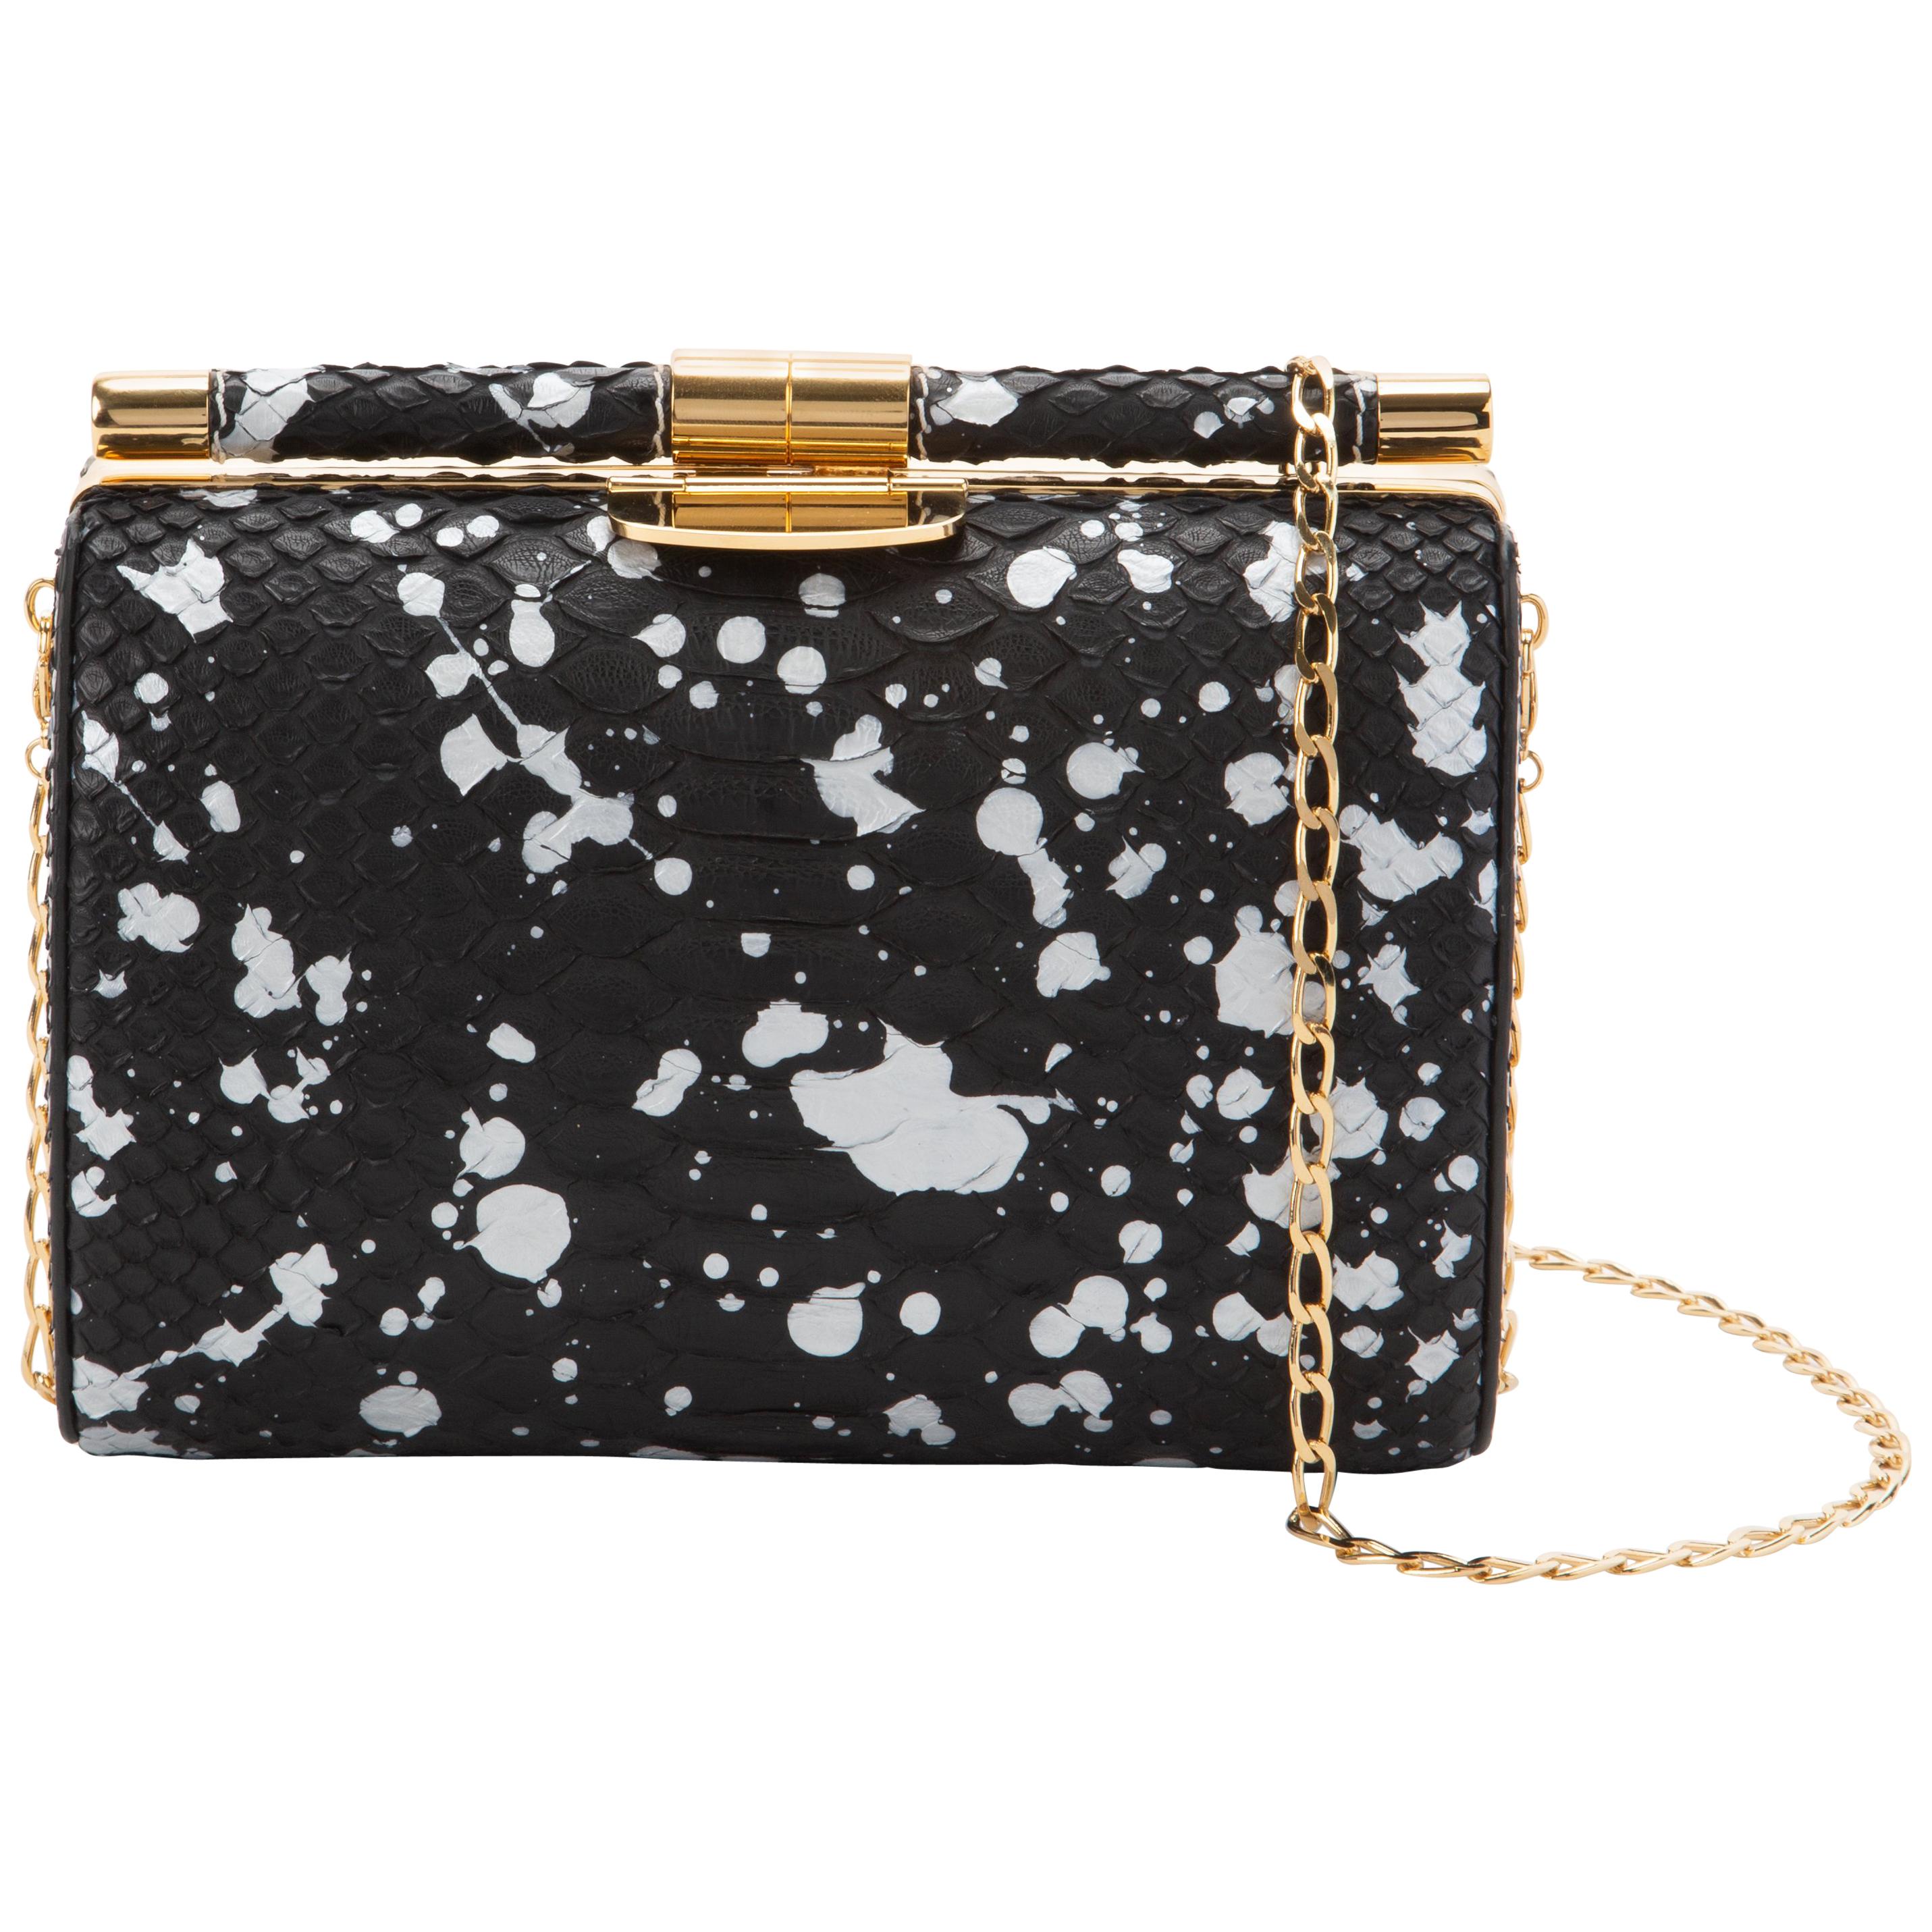 The Anjuli clutch is a structured oval clutch, with an optional gold cross-body chain, and interior pocket. It features our signature slide-lock closure and Thayer blue satin lining. 

**Please note that we are unable to ship Python anywhere in the